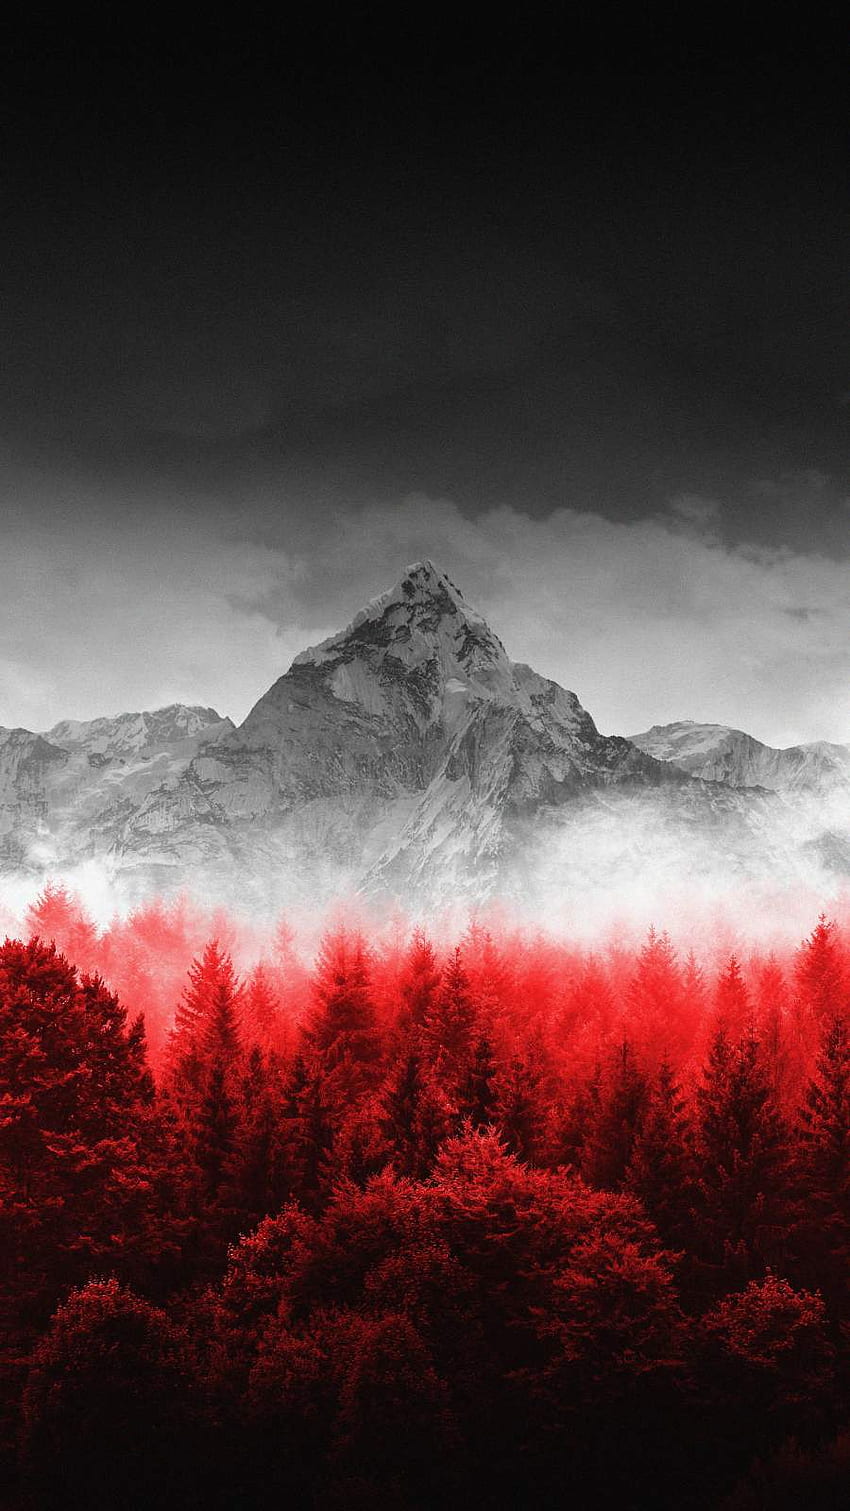 Mountain Iphone Wallpaper Images  Free Photos PNG Stickers Wallpapers   Backgrounds  rawpixel